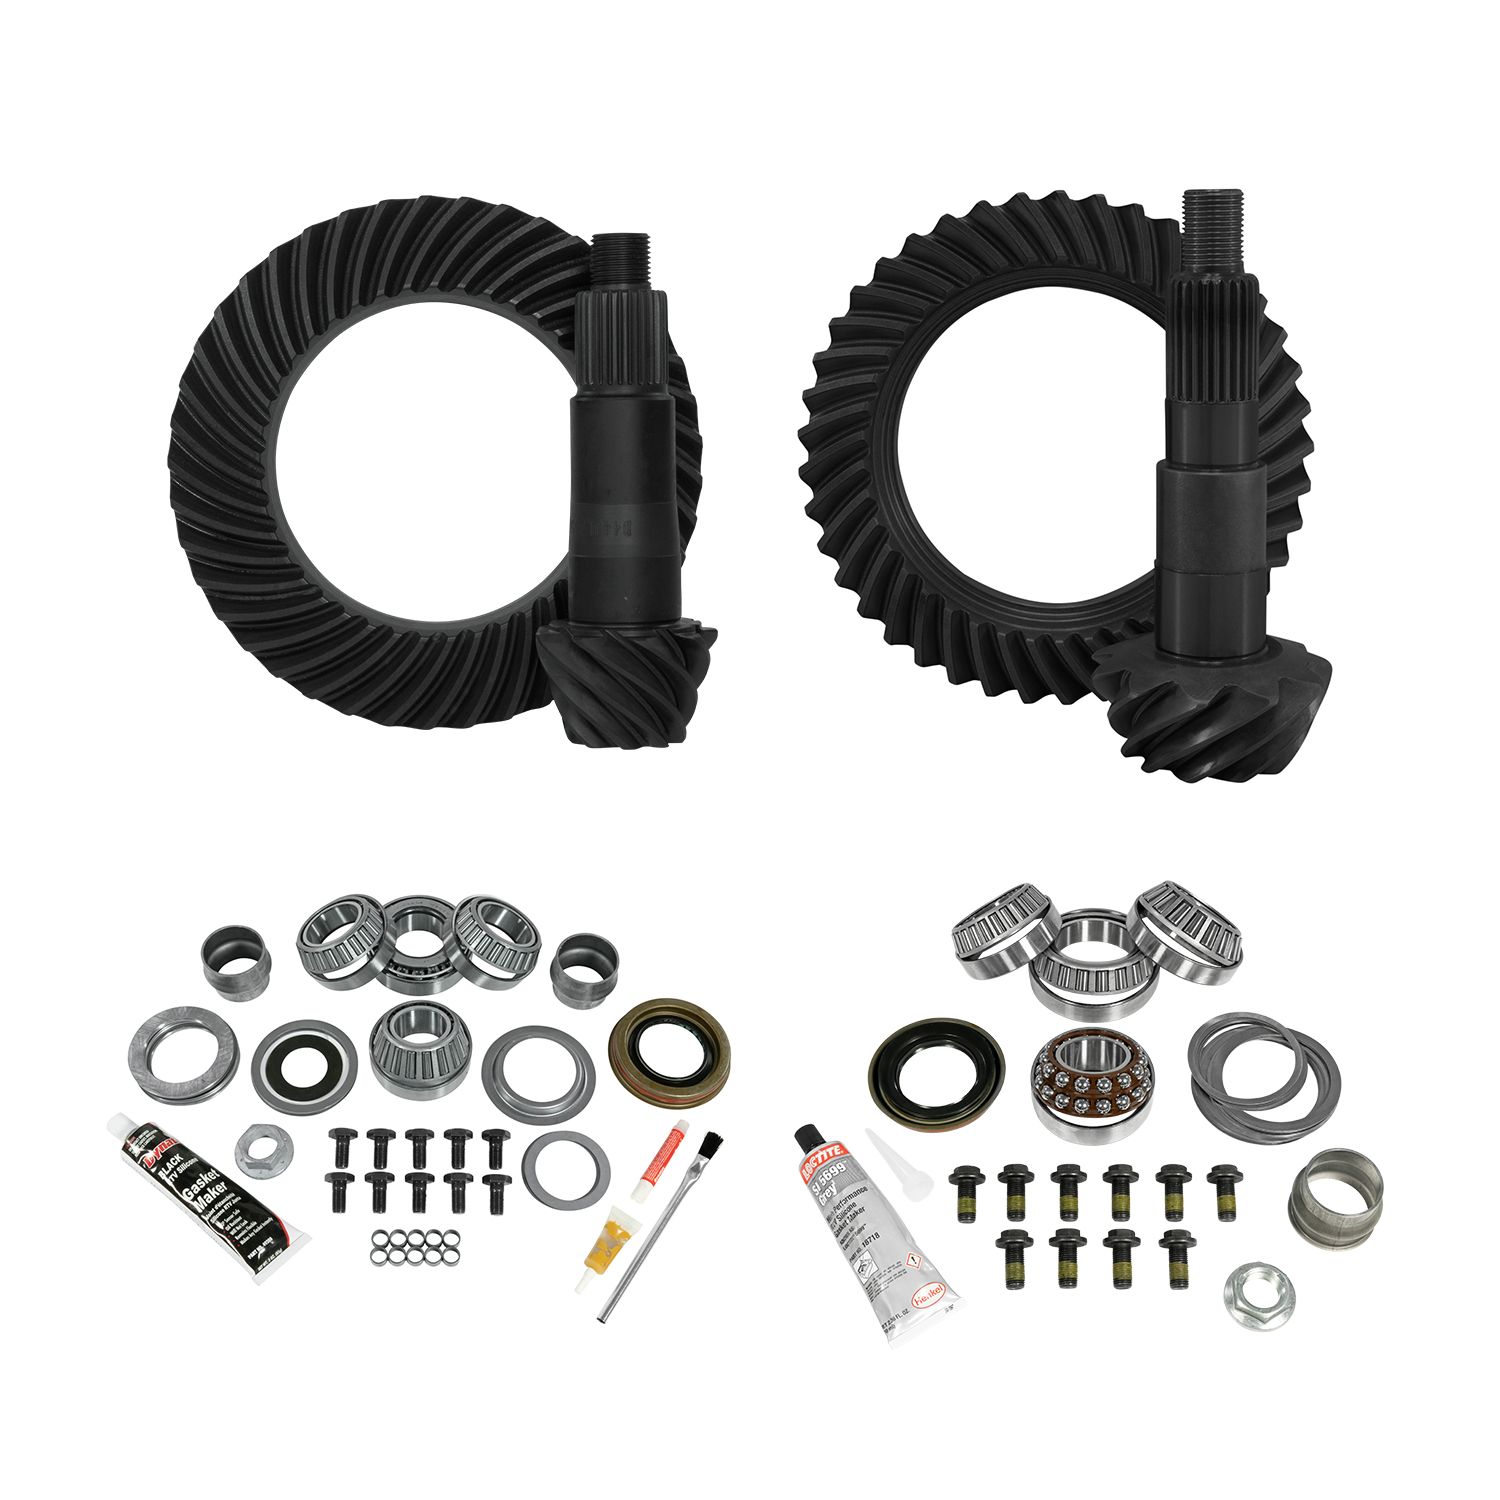 Re-Gear And Install Kit, D30 Front/D44 Rear, Jeep Jl Non-Rubicon, 4.11